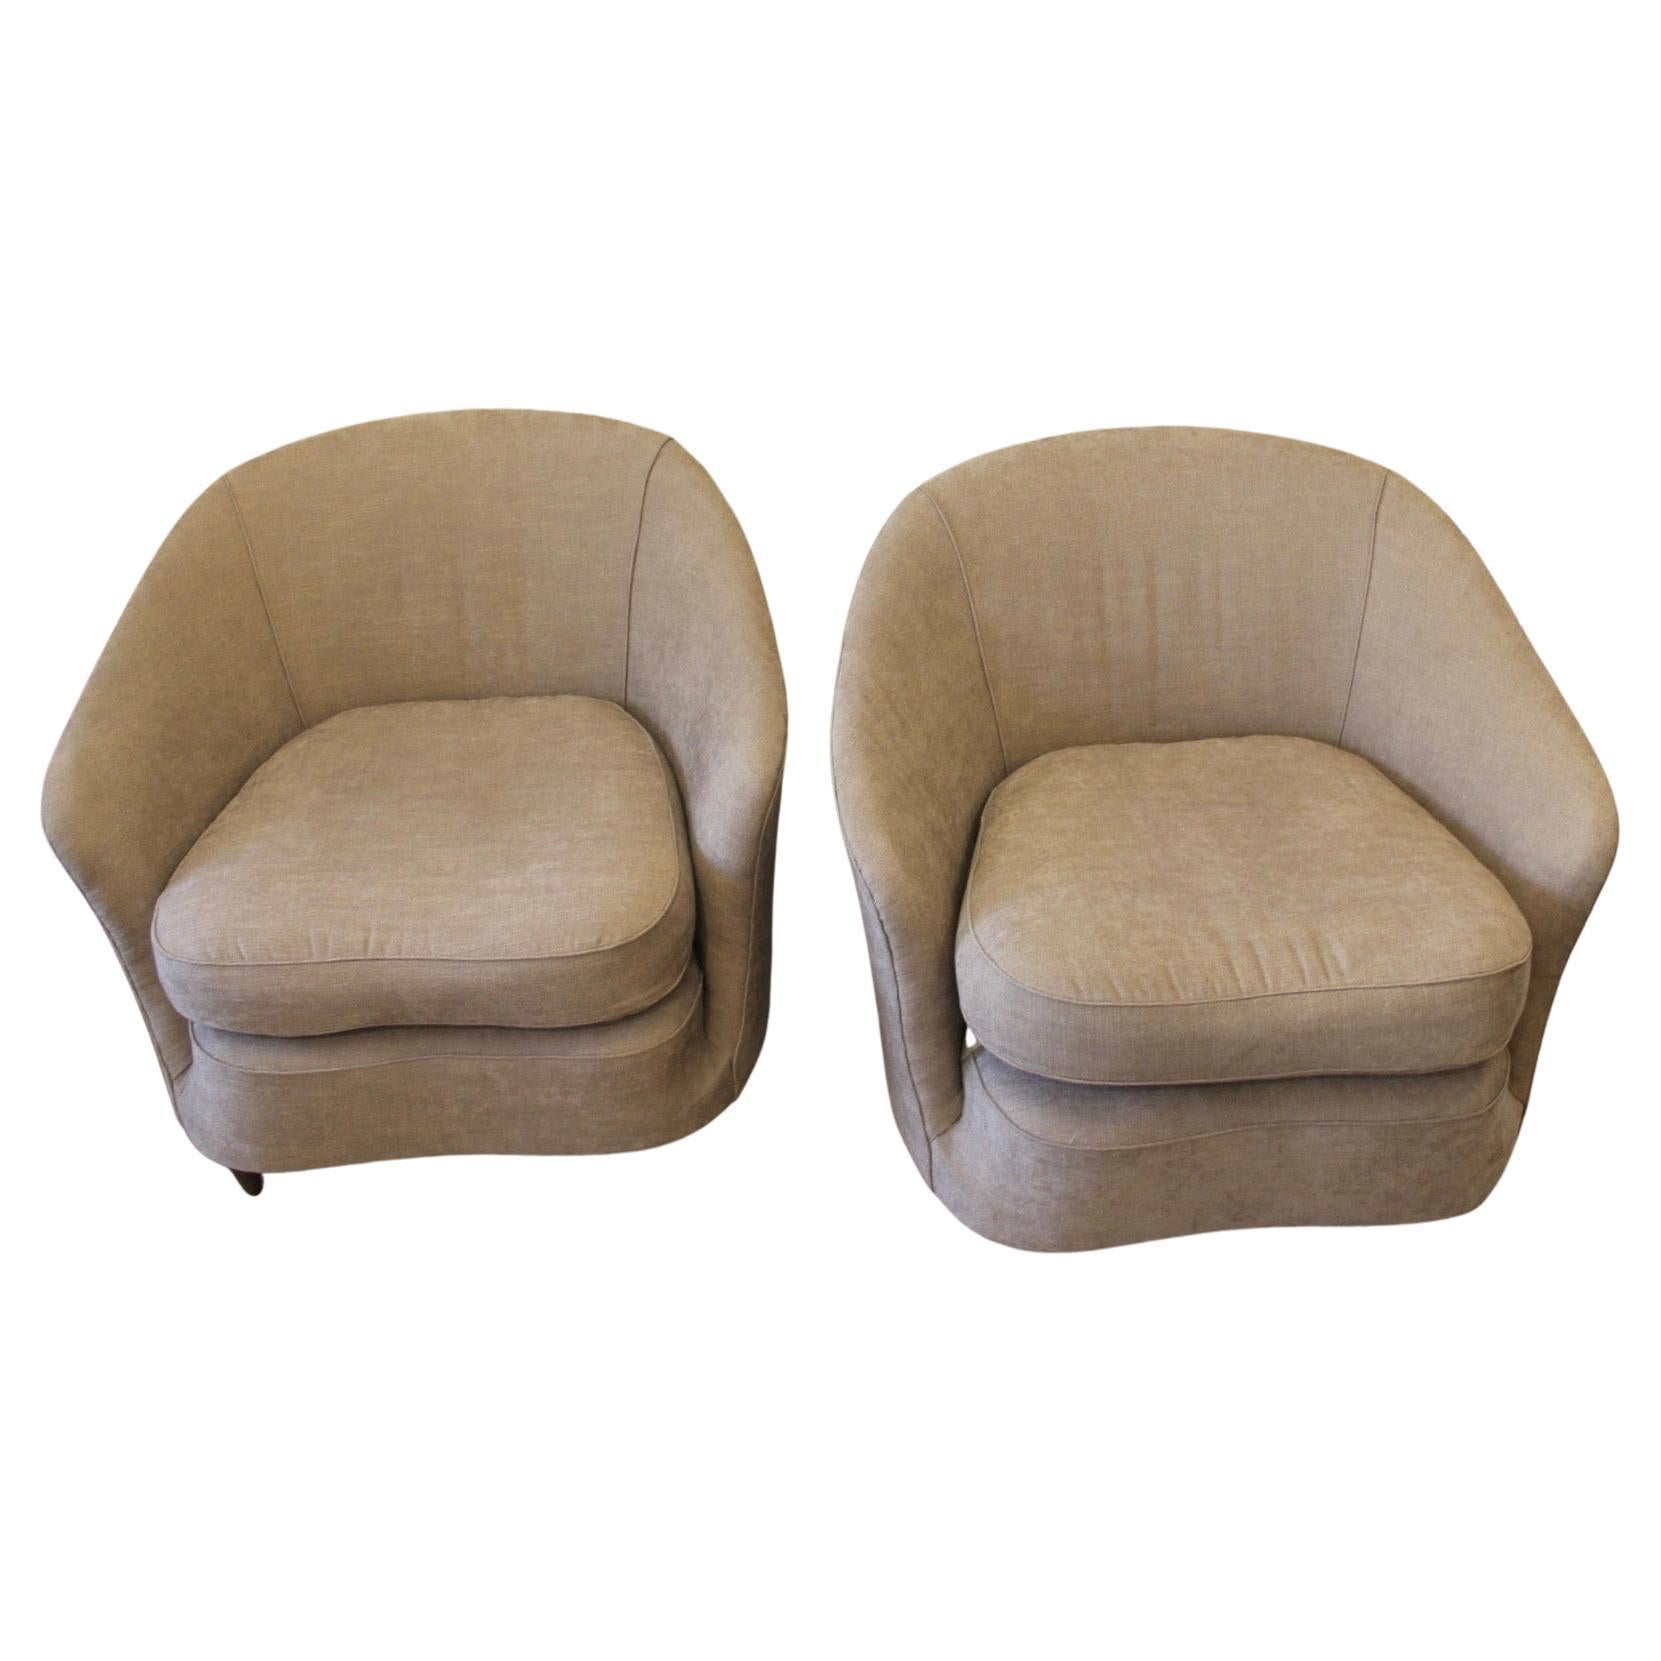 Pair of club armchairs from the 50s, Italian.
I redid the upholstery of the armchairs with a pearl gray cotton fabric.
The feet are wooden.
Model of very attractive armchairs.